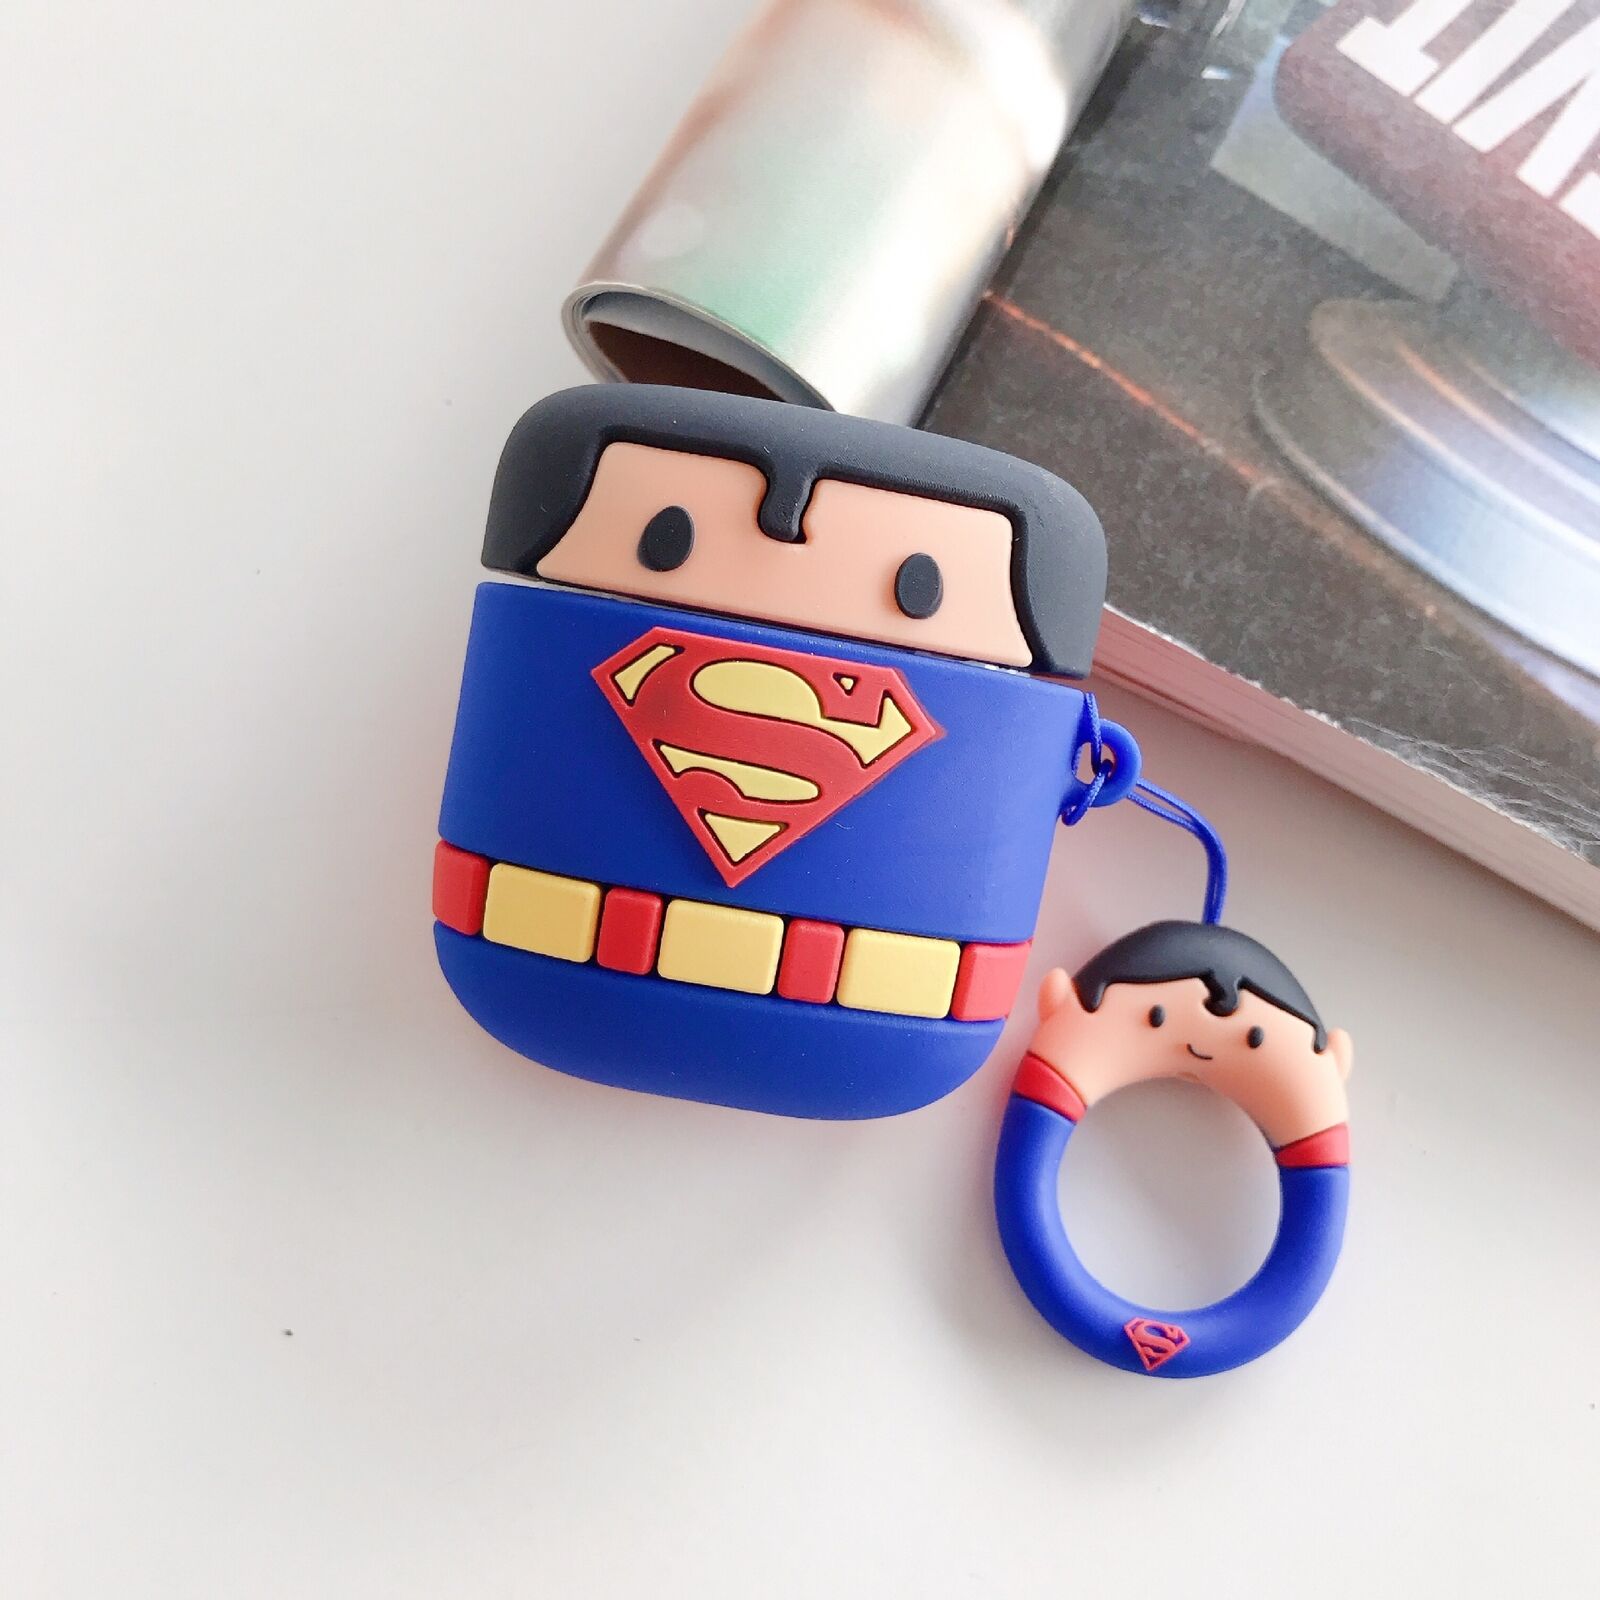 Cute Super Hero Cartoon Silicone Airpods Case Cover Skin For Apple Airpods 1/2 Airpods Case AtlasCase Superman2 + Ring 